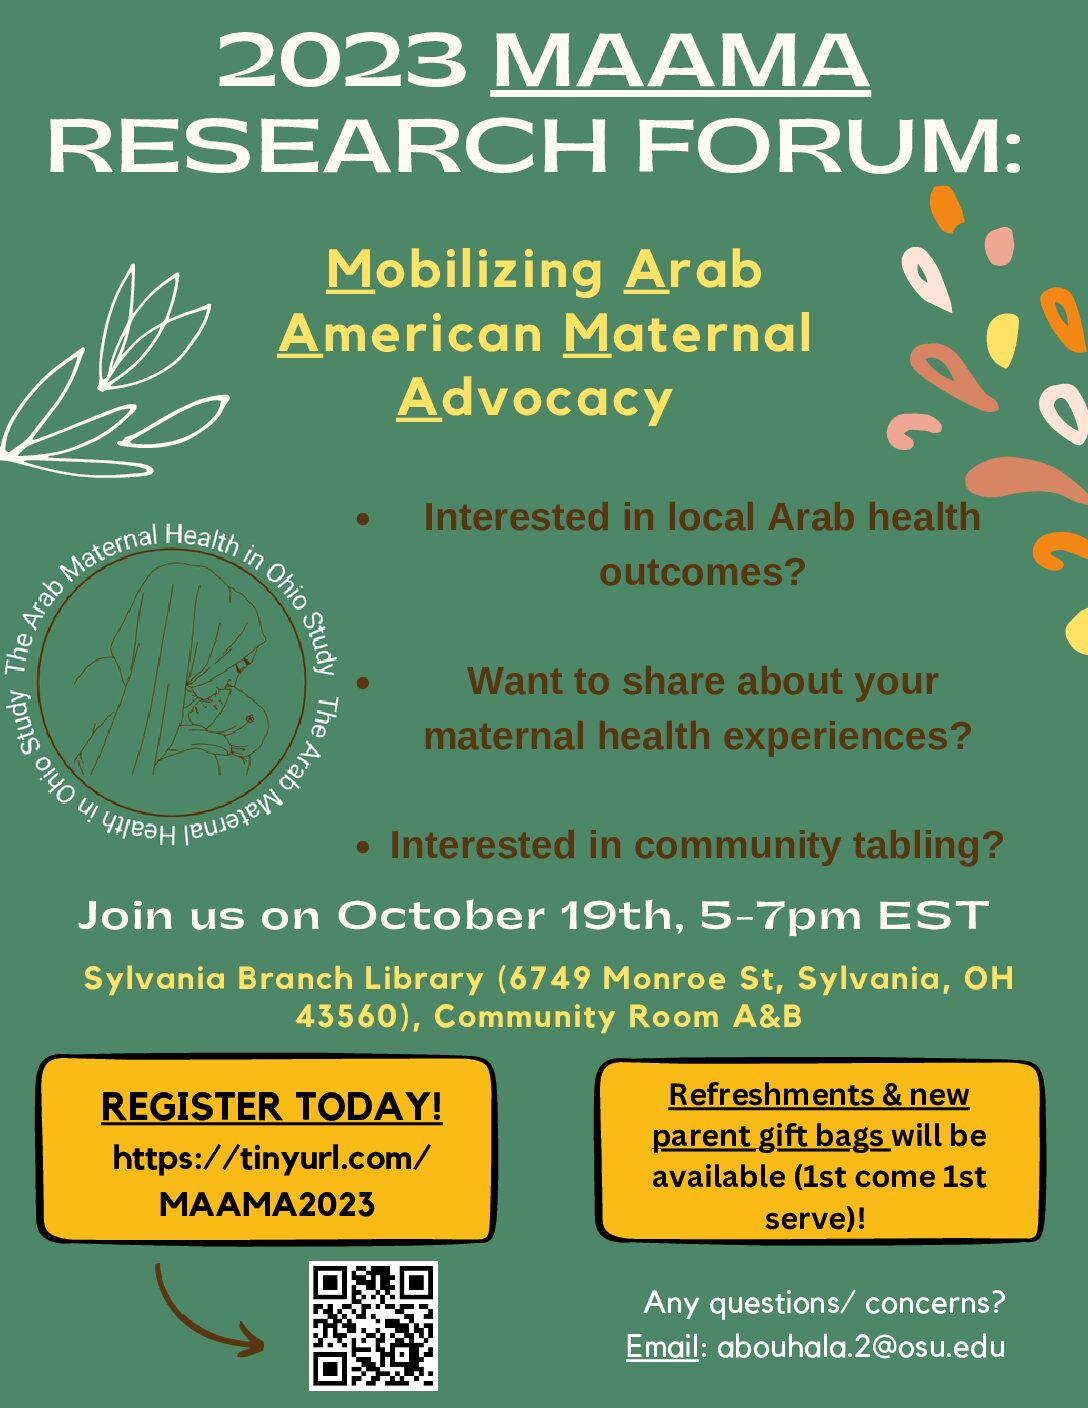 2023 MAAMA Research Forum: Mobilizing Arab American Maternal Advocacy